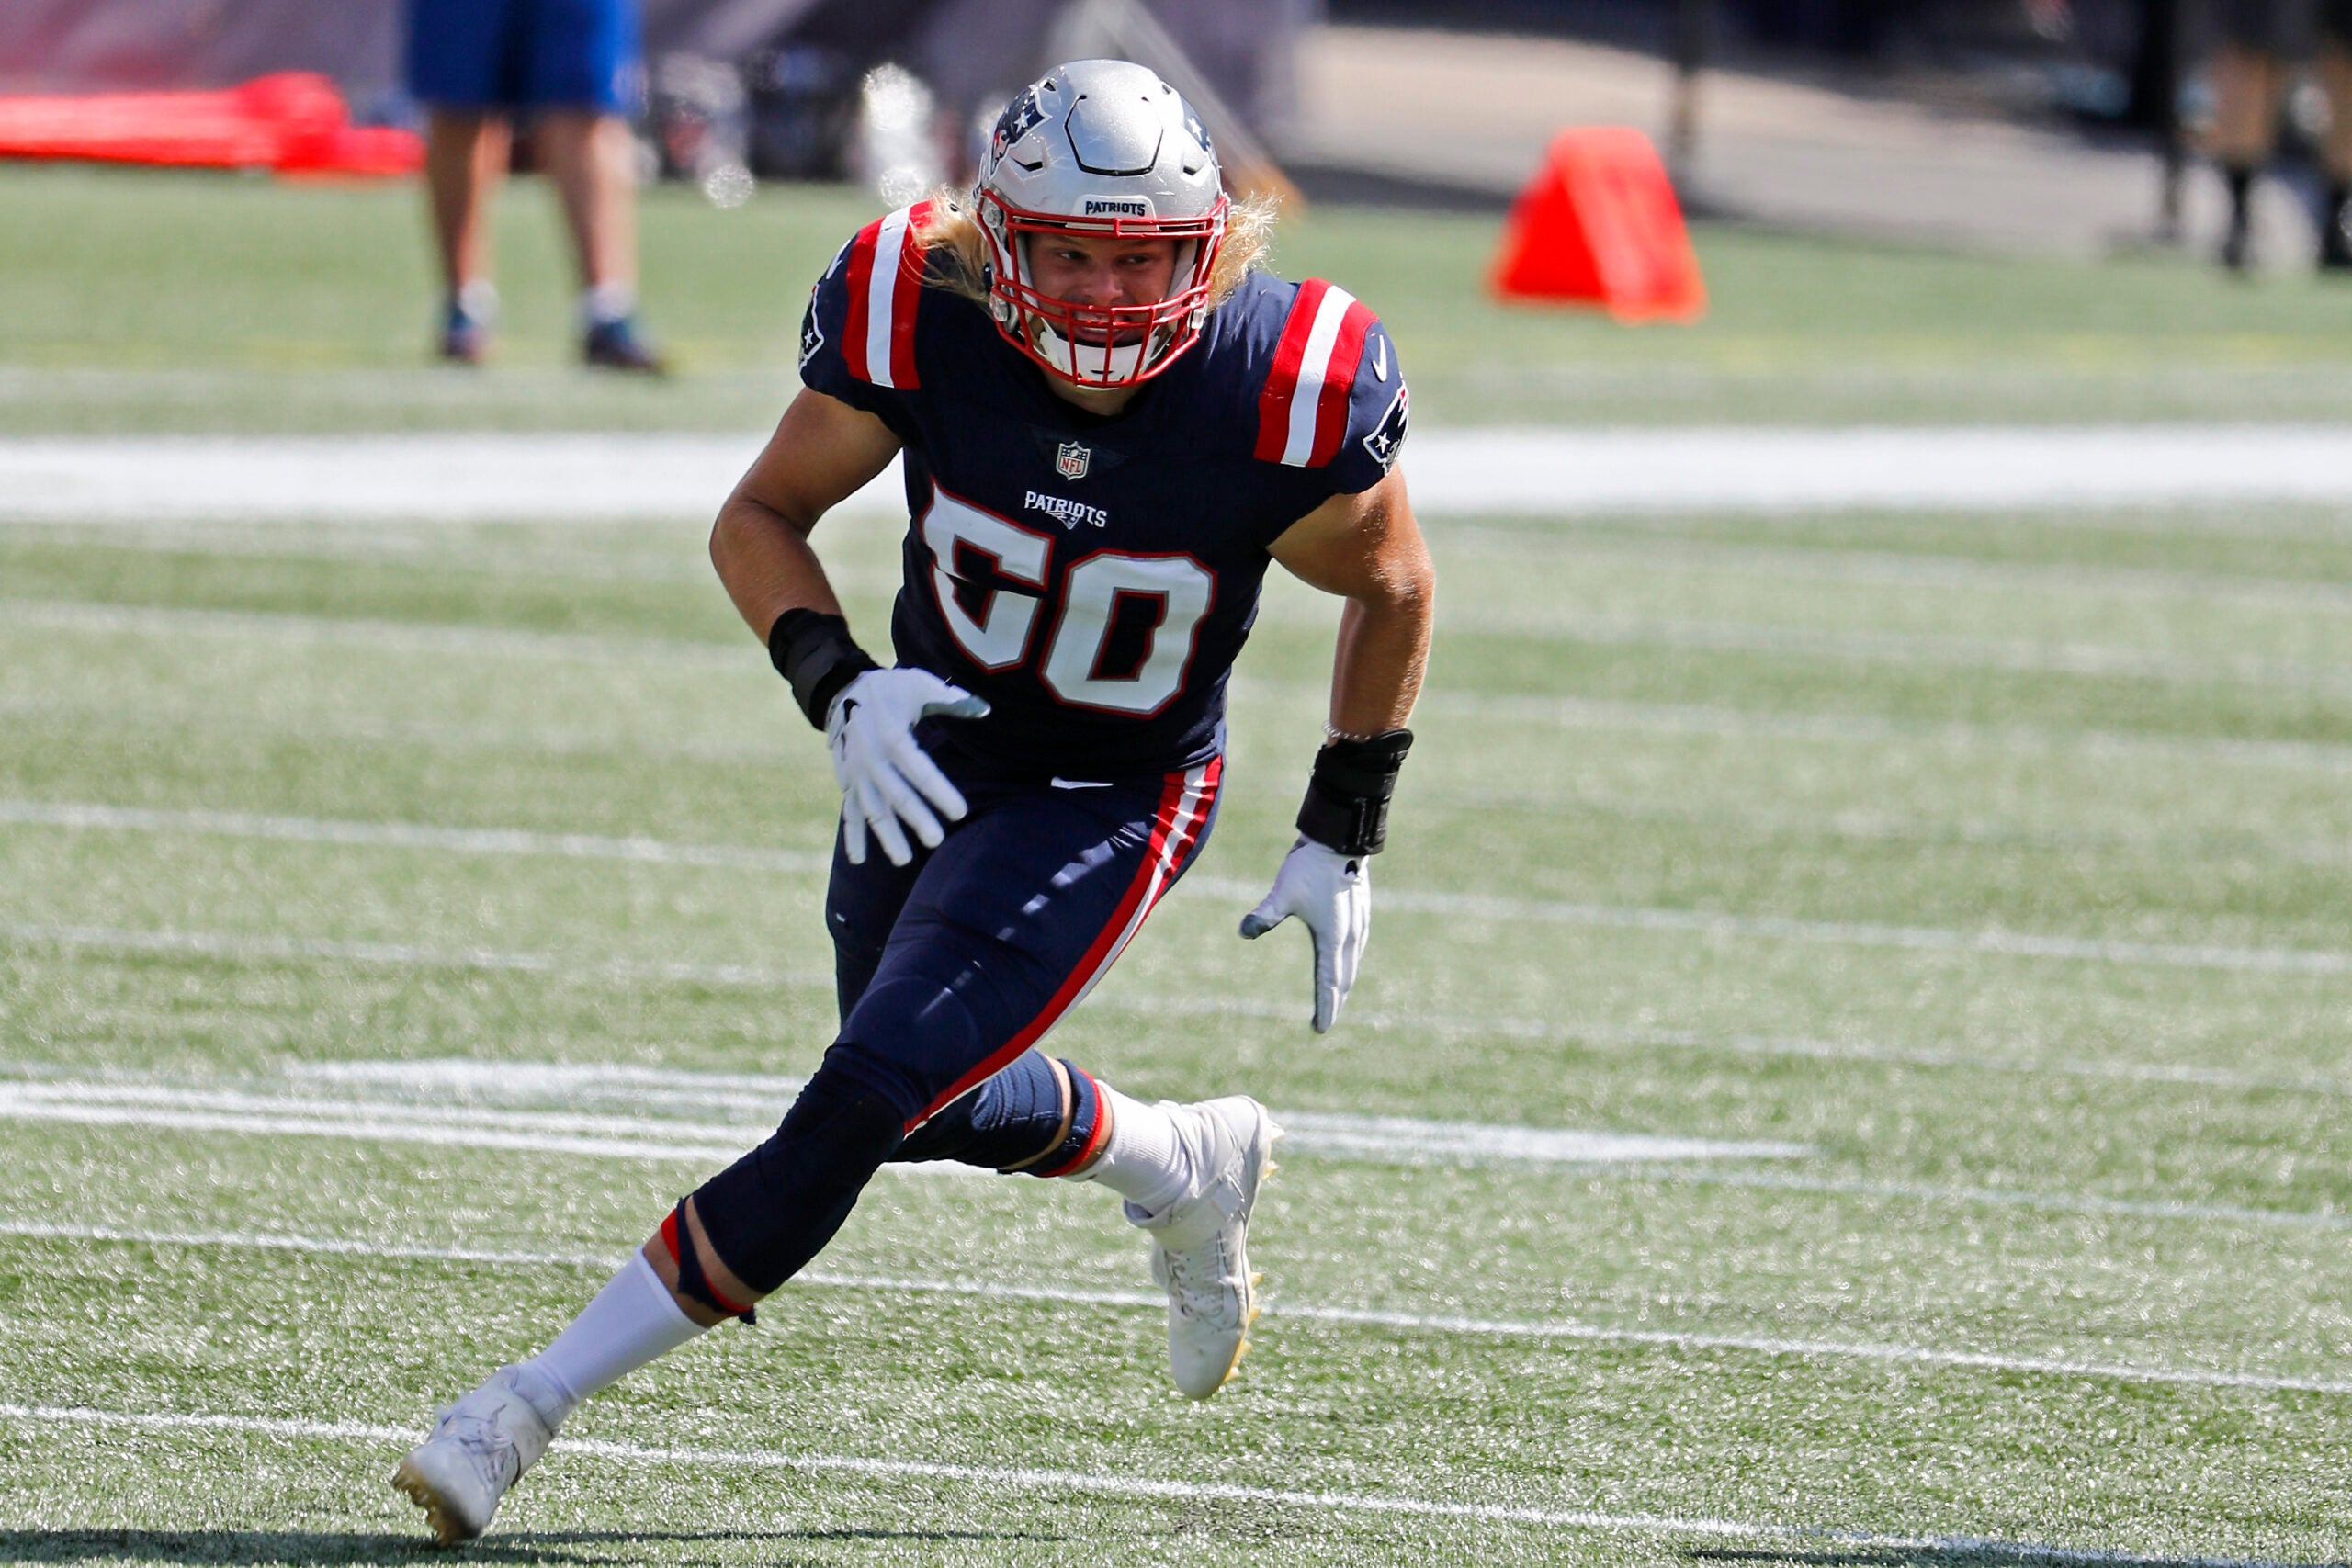 Chase Winovich's Week 1 performance lifts the ceiling of the Patriots'  defense